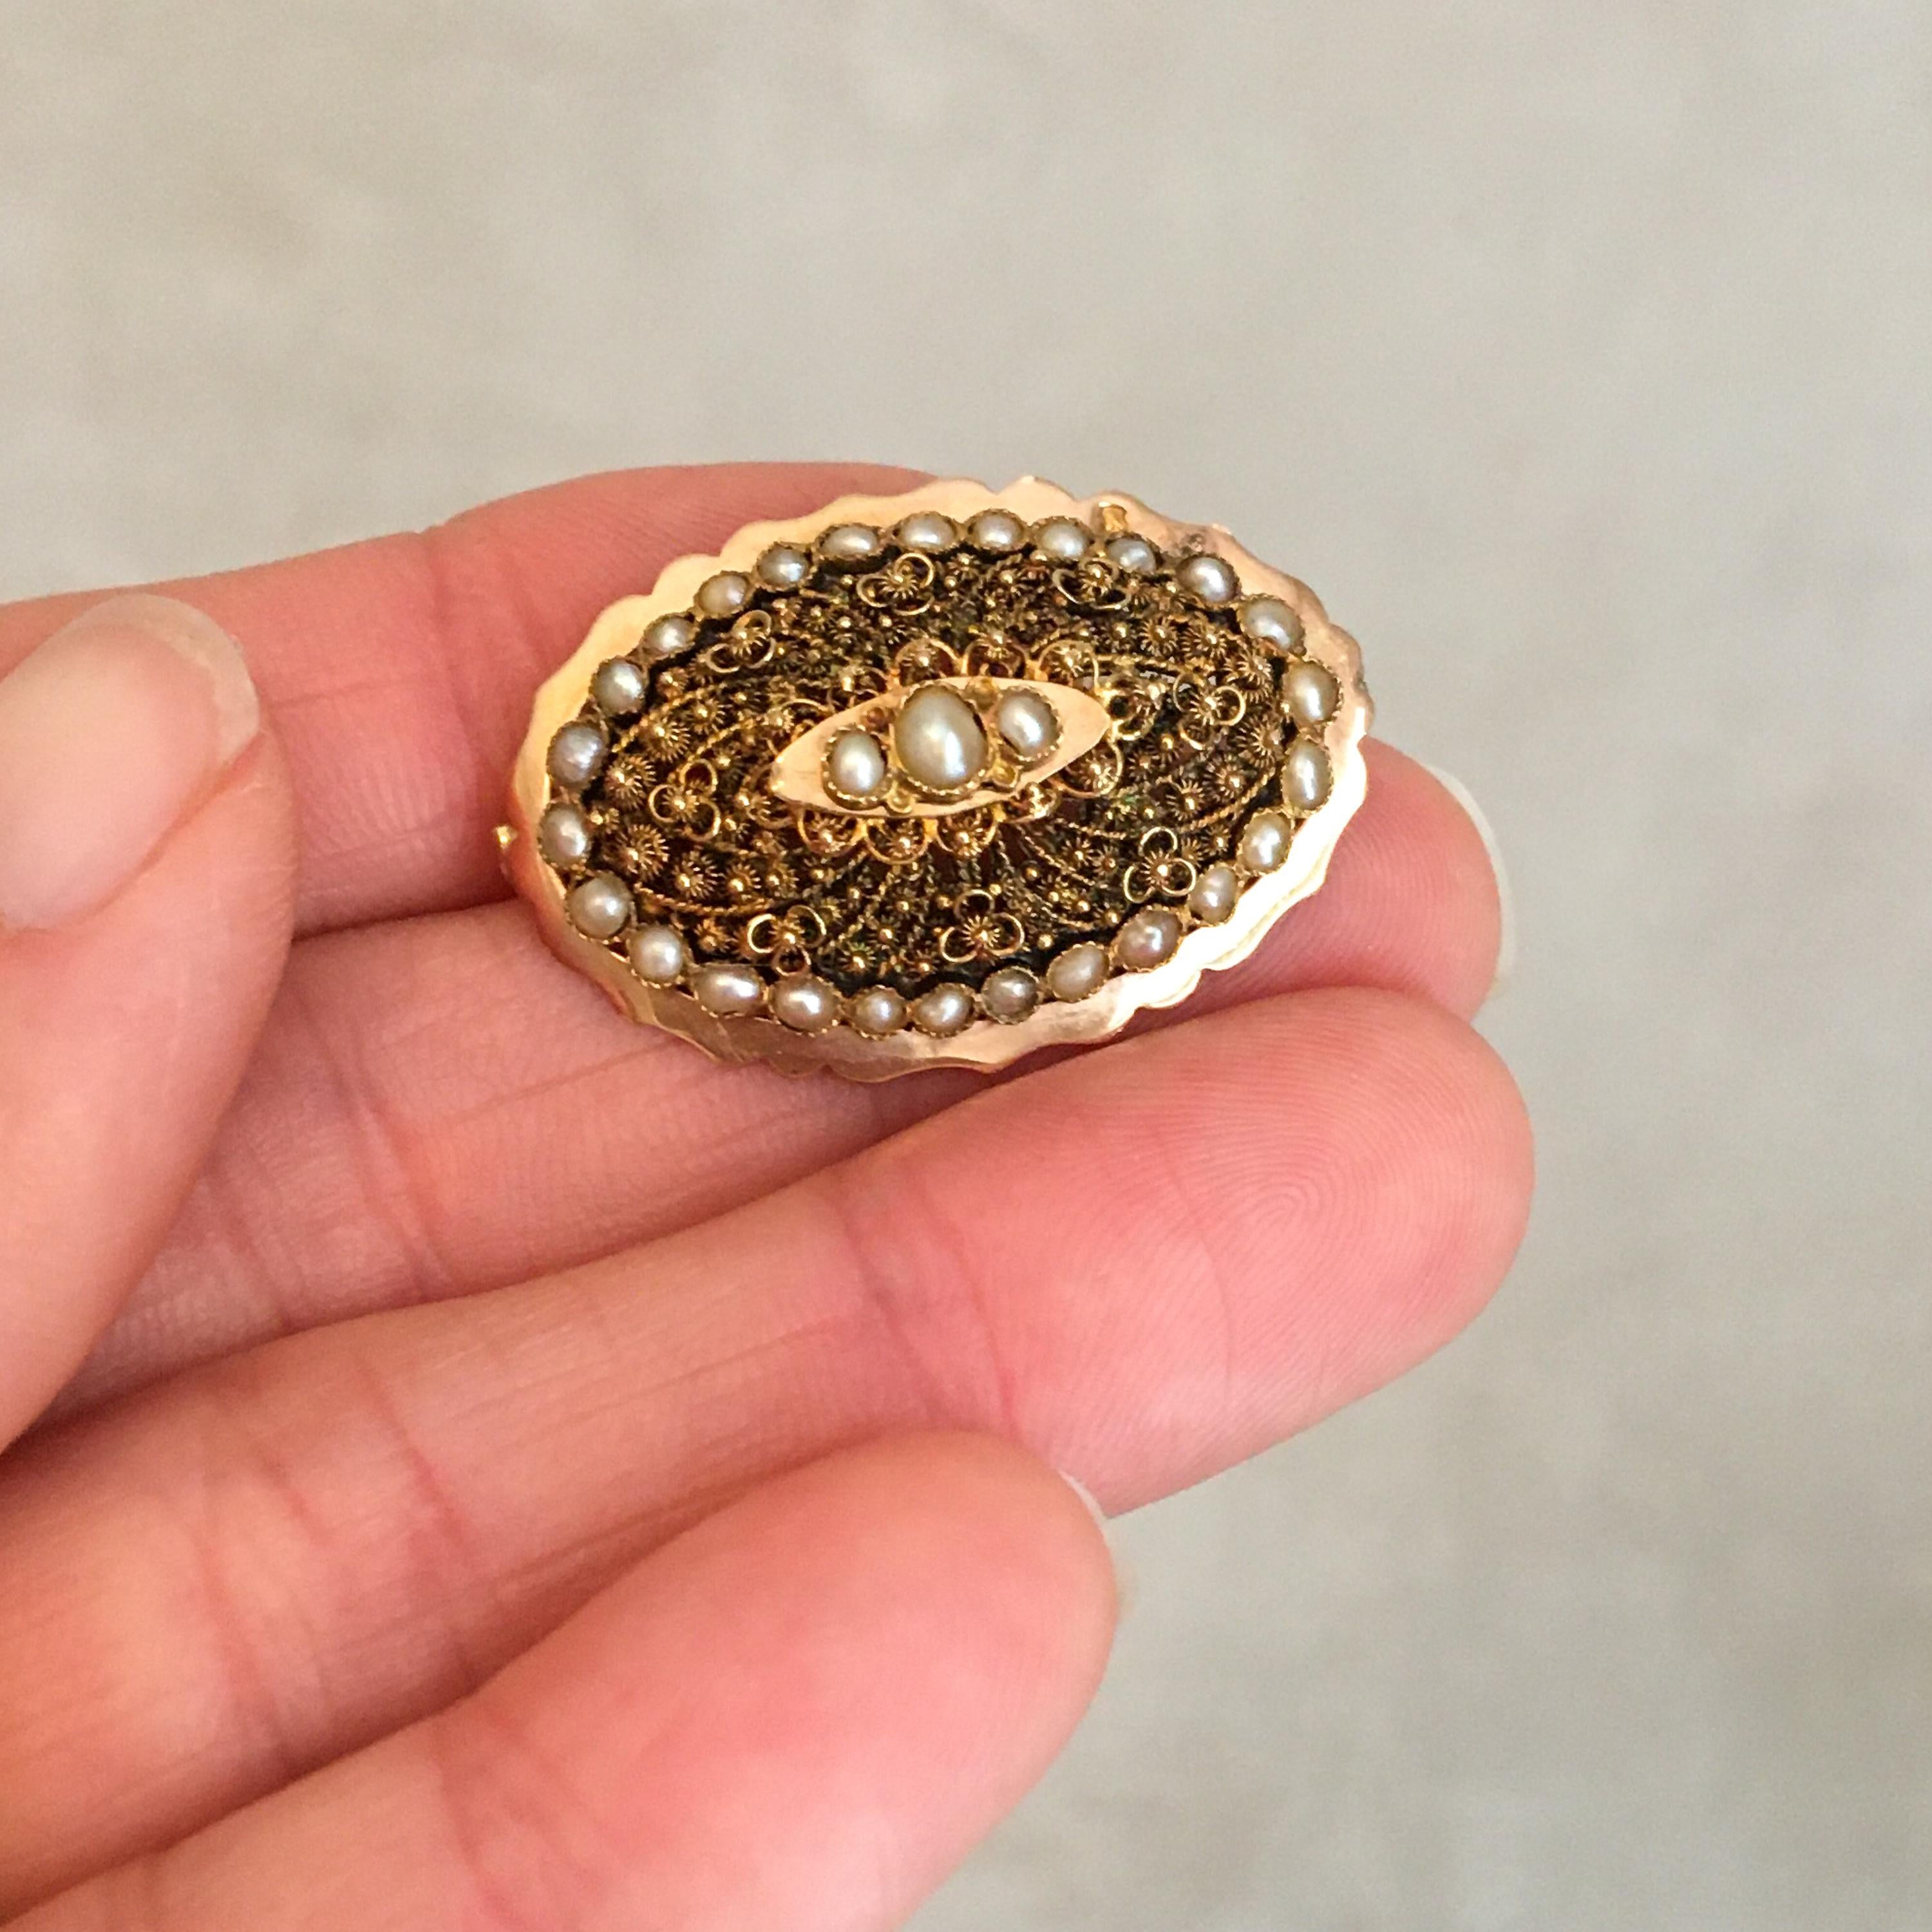 This is an antique 19th Century 18 karat yellow gold brooch set with twenty-nine lustrous seed pearls. This beautiful brooch has very fine and detailed cannetille work while the border has a scalloped design. This kind of technique demands a very